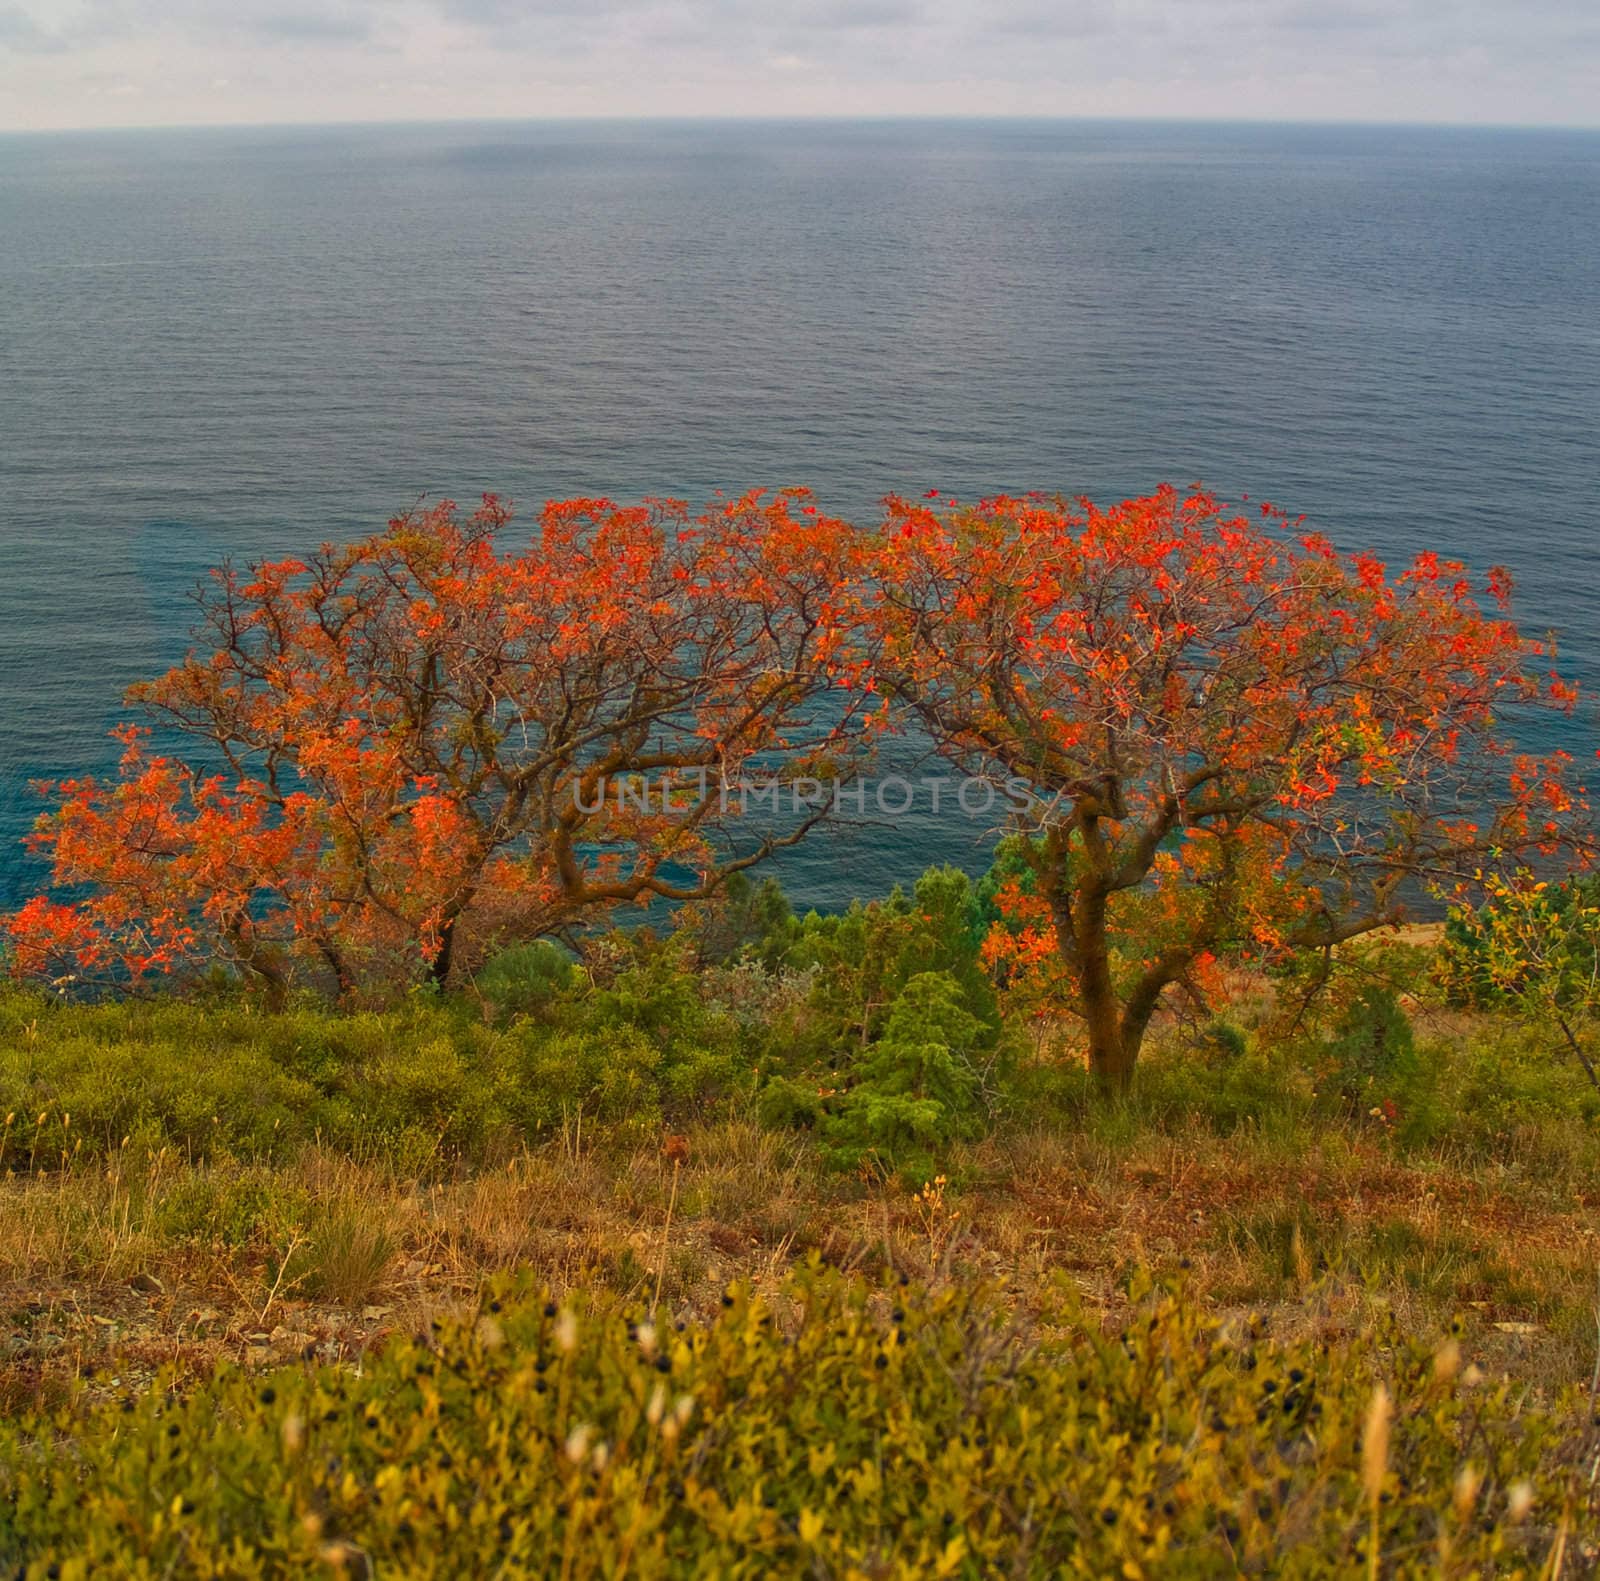 Landscape with two red trees on steep. Captured on a Black Sea, near Anapa town.